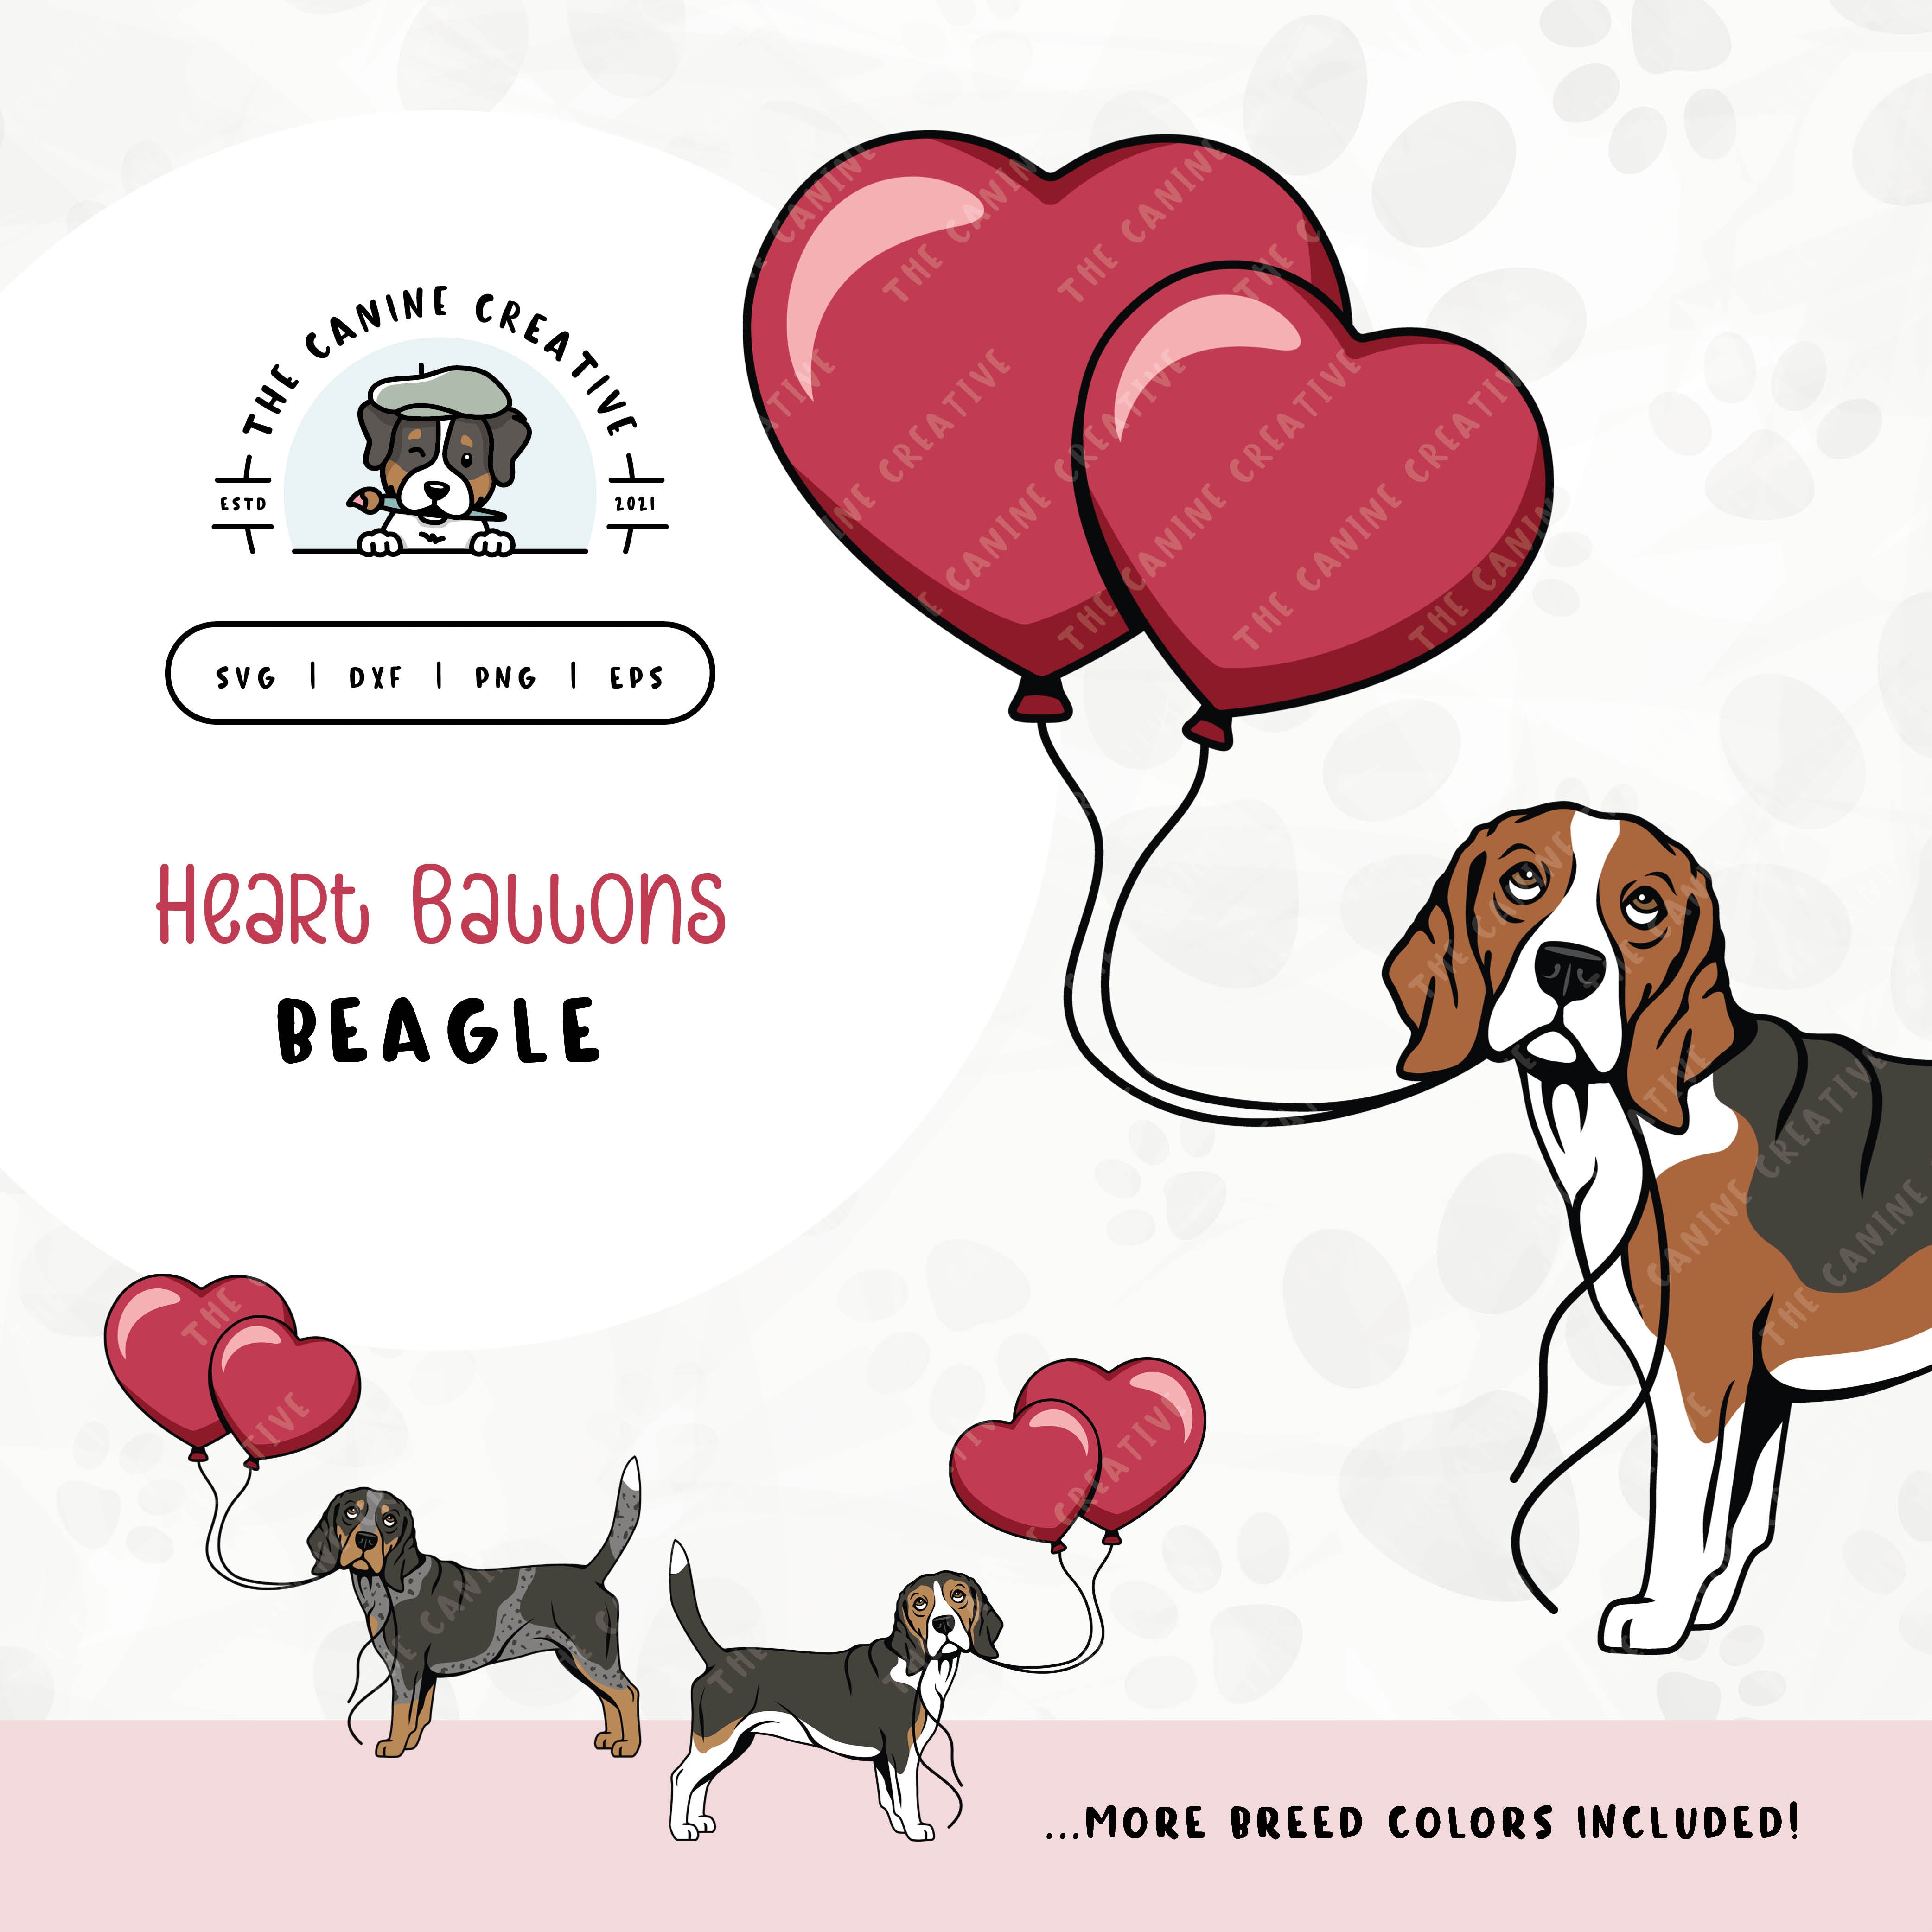 This charming illustration of a Beagle features a dog holding heart-shaped balloons. File formats include: SVG, DXF, PNG, and EPS.